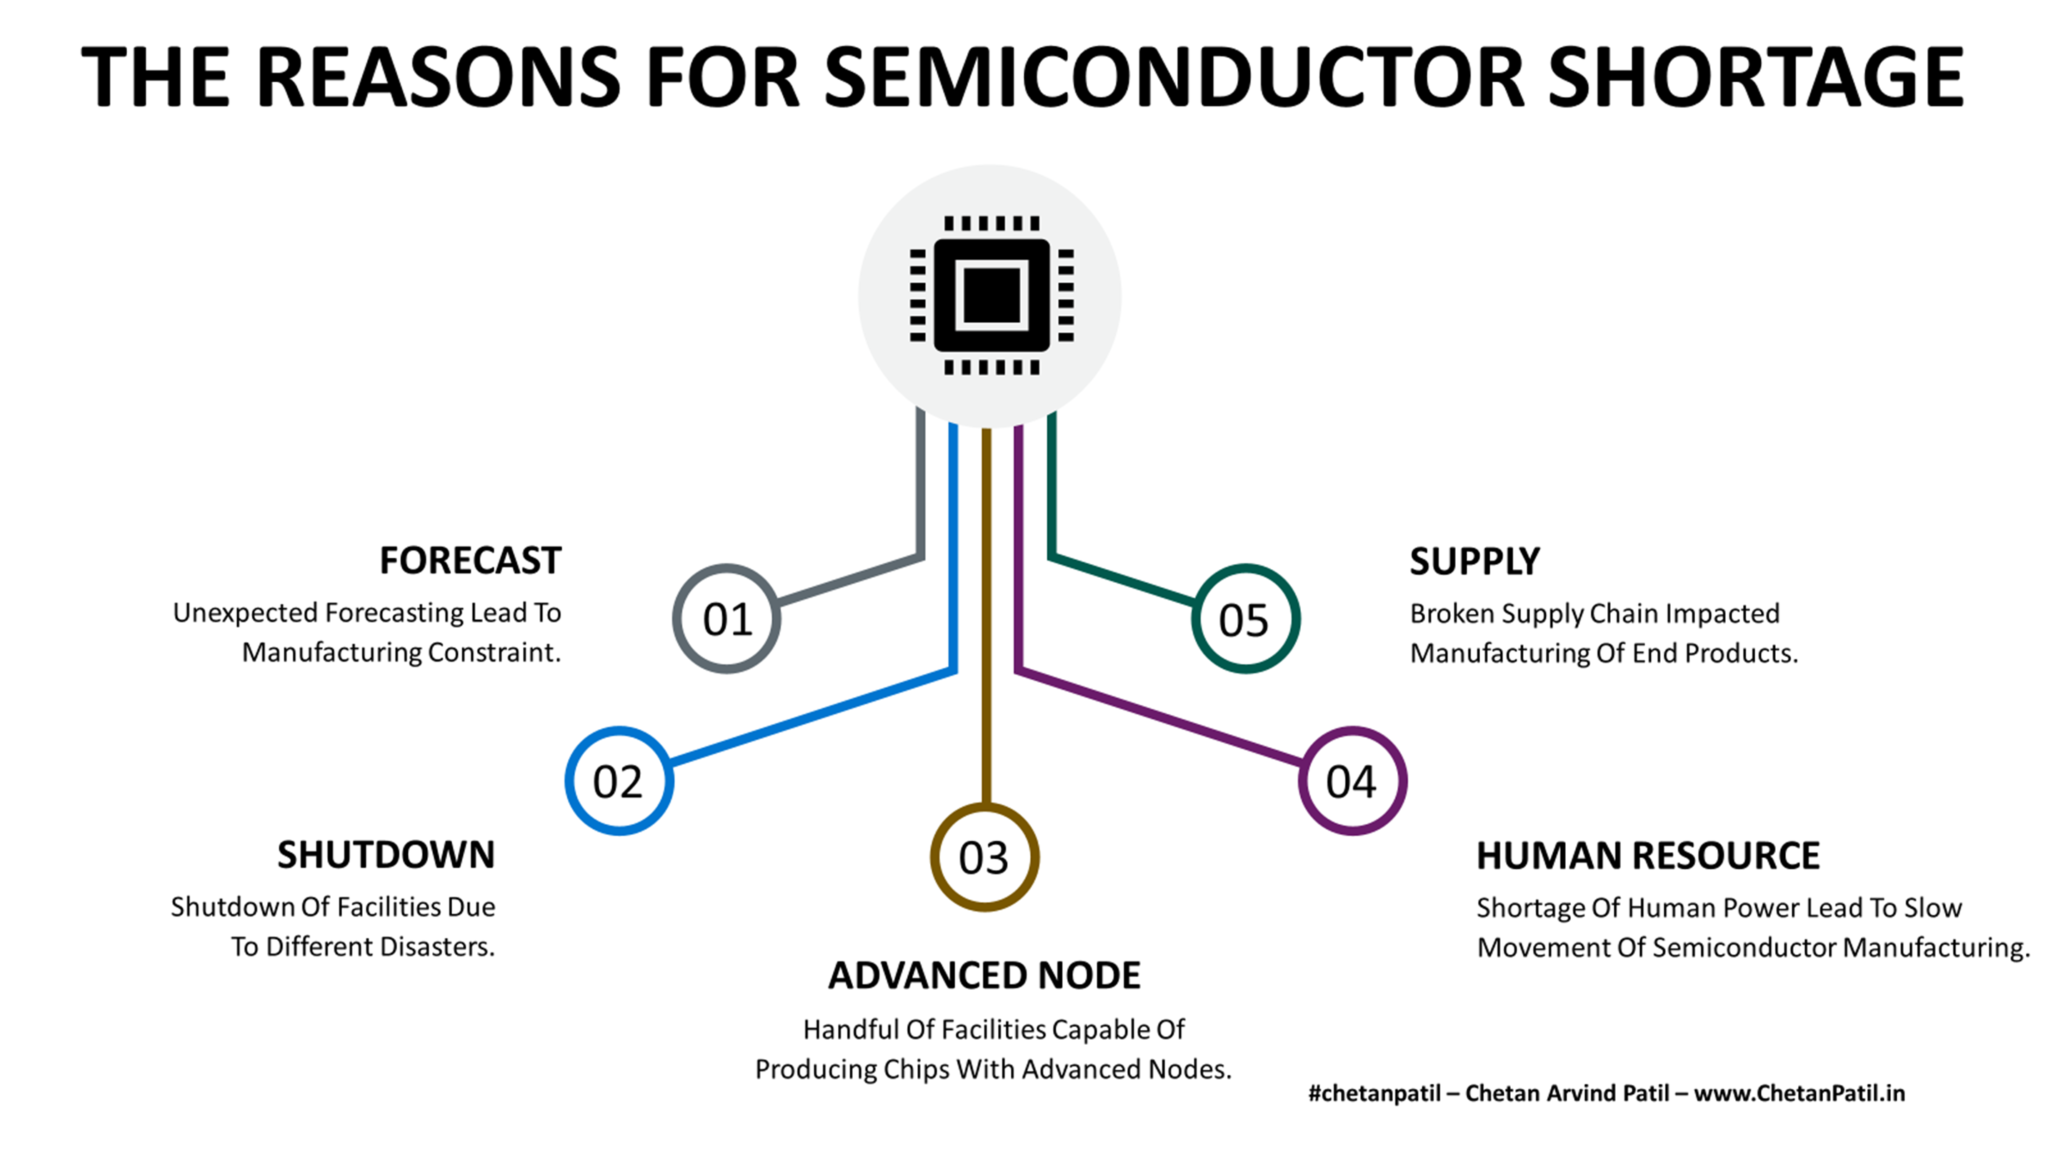 The Reasons And Mitigation Plan For Semiconductor Shortage 